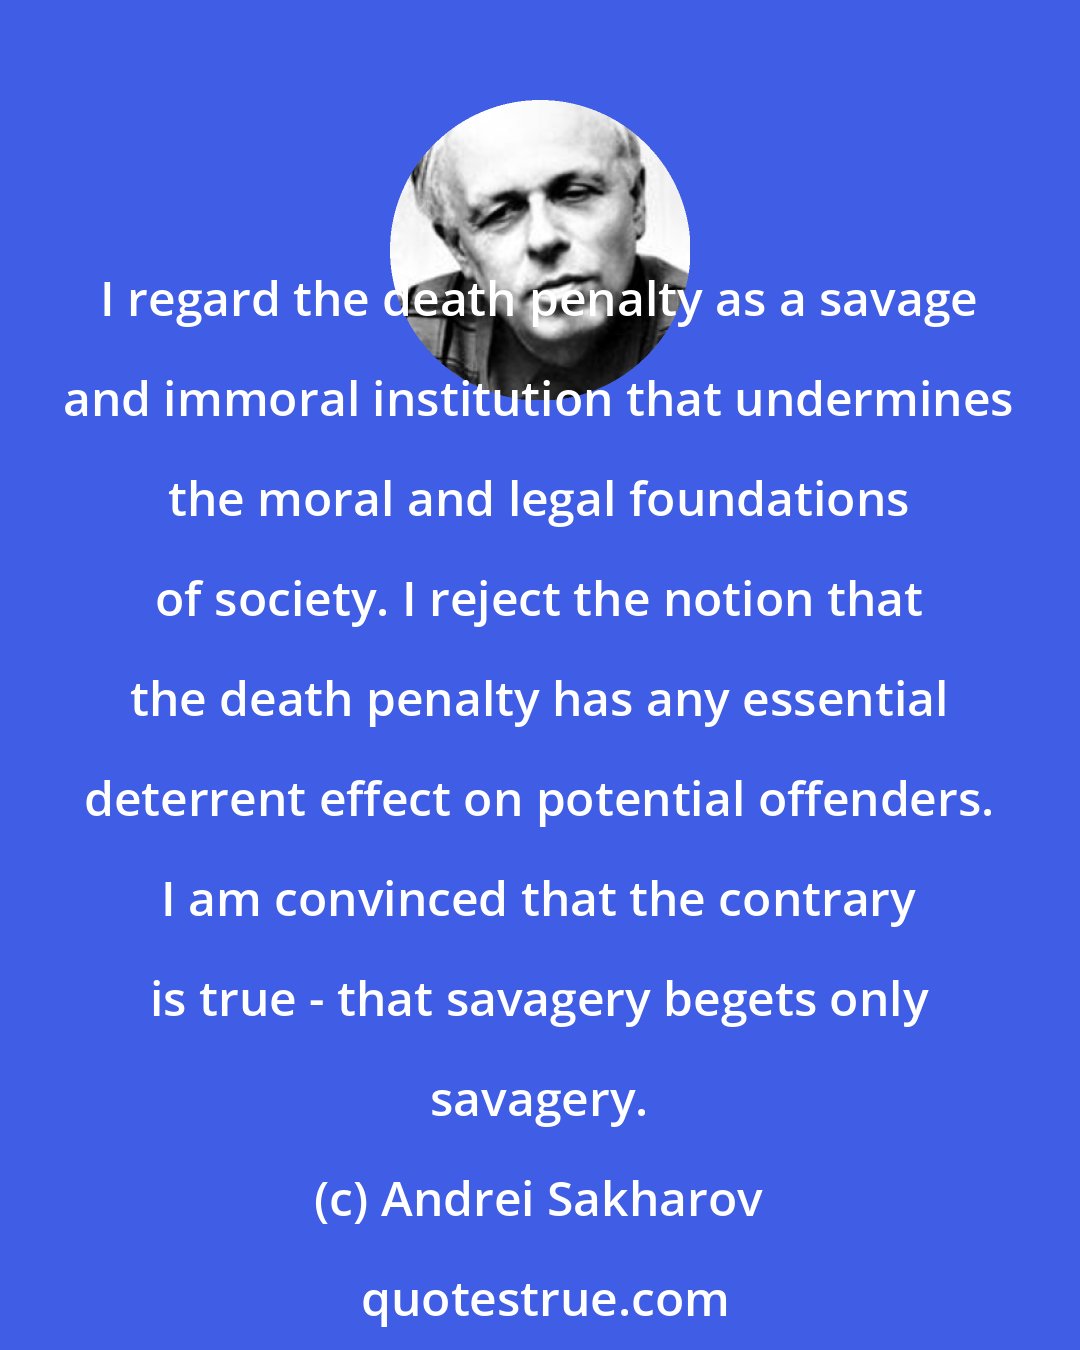 Andrei Sakharov: I regard the death penalty as a savage and immoral institution that undermines the moral and legal foundations of society. I reject the notion that the death penalty has any essential deterrent effect on potential offenders. I am convinced that the contrary is true - that savagery begets only savagery.